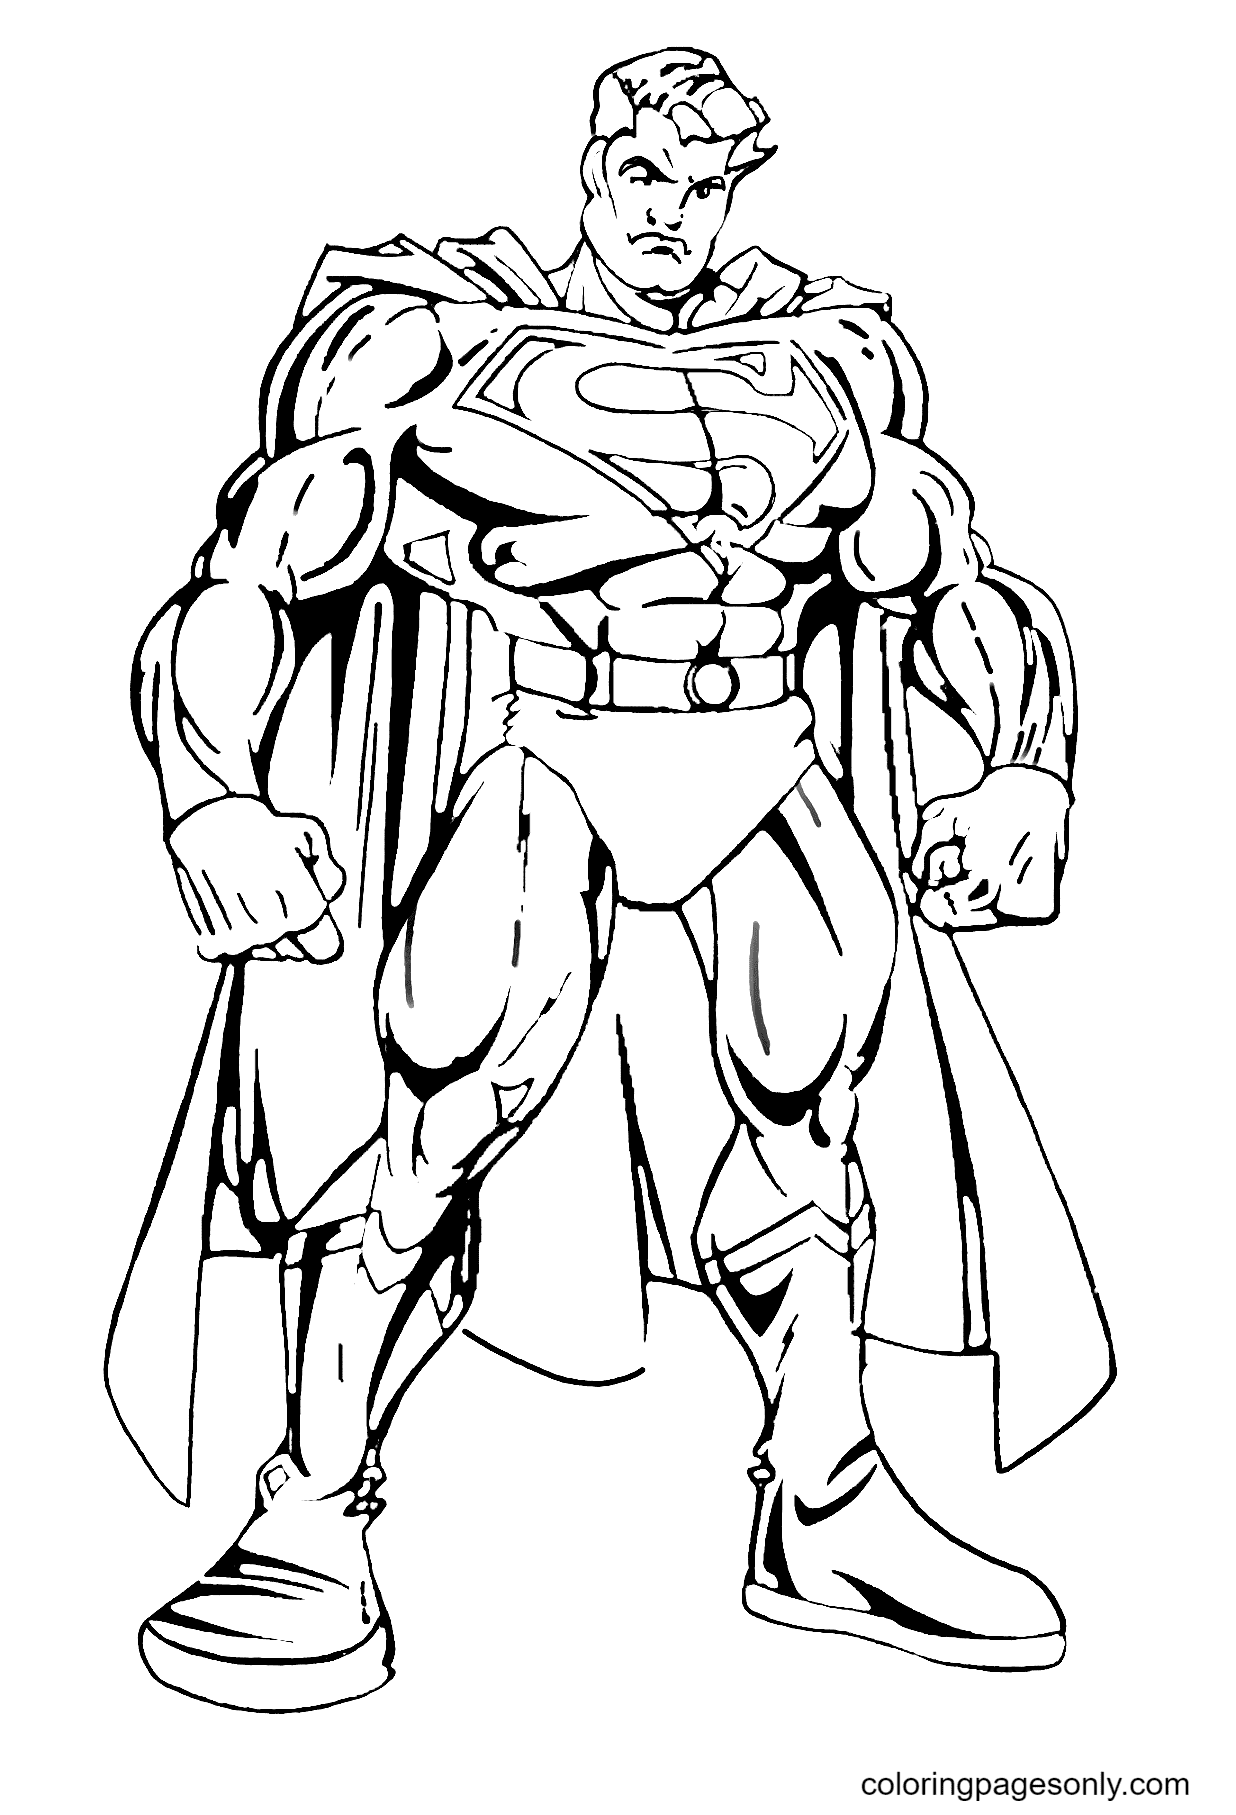 Superman Image Coloring Pages